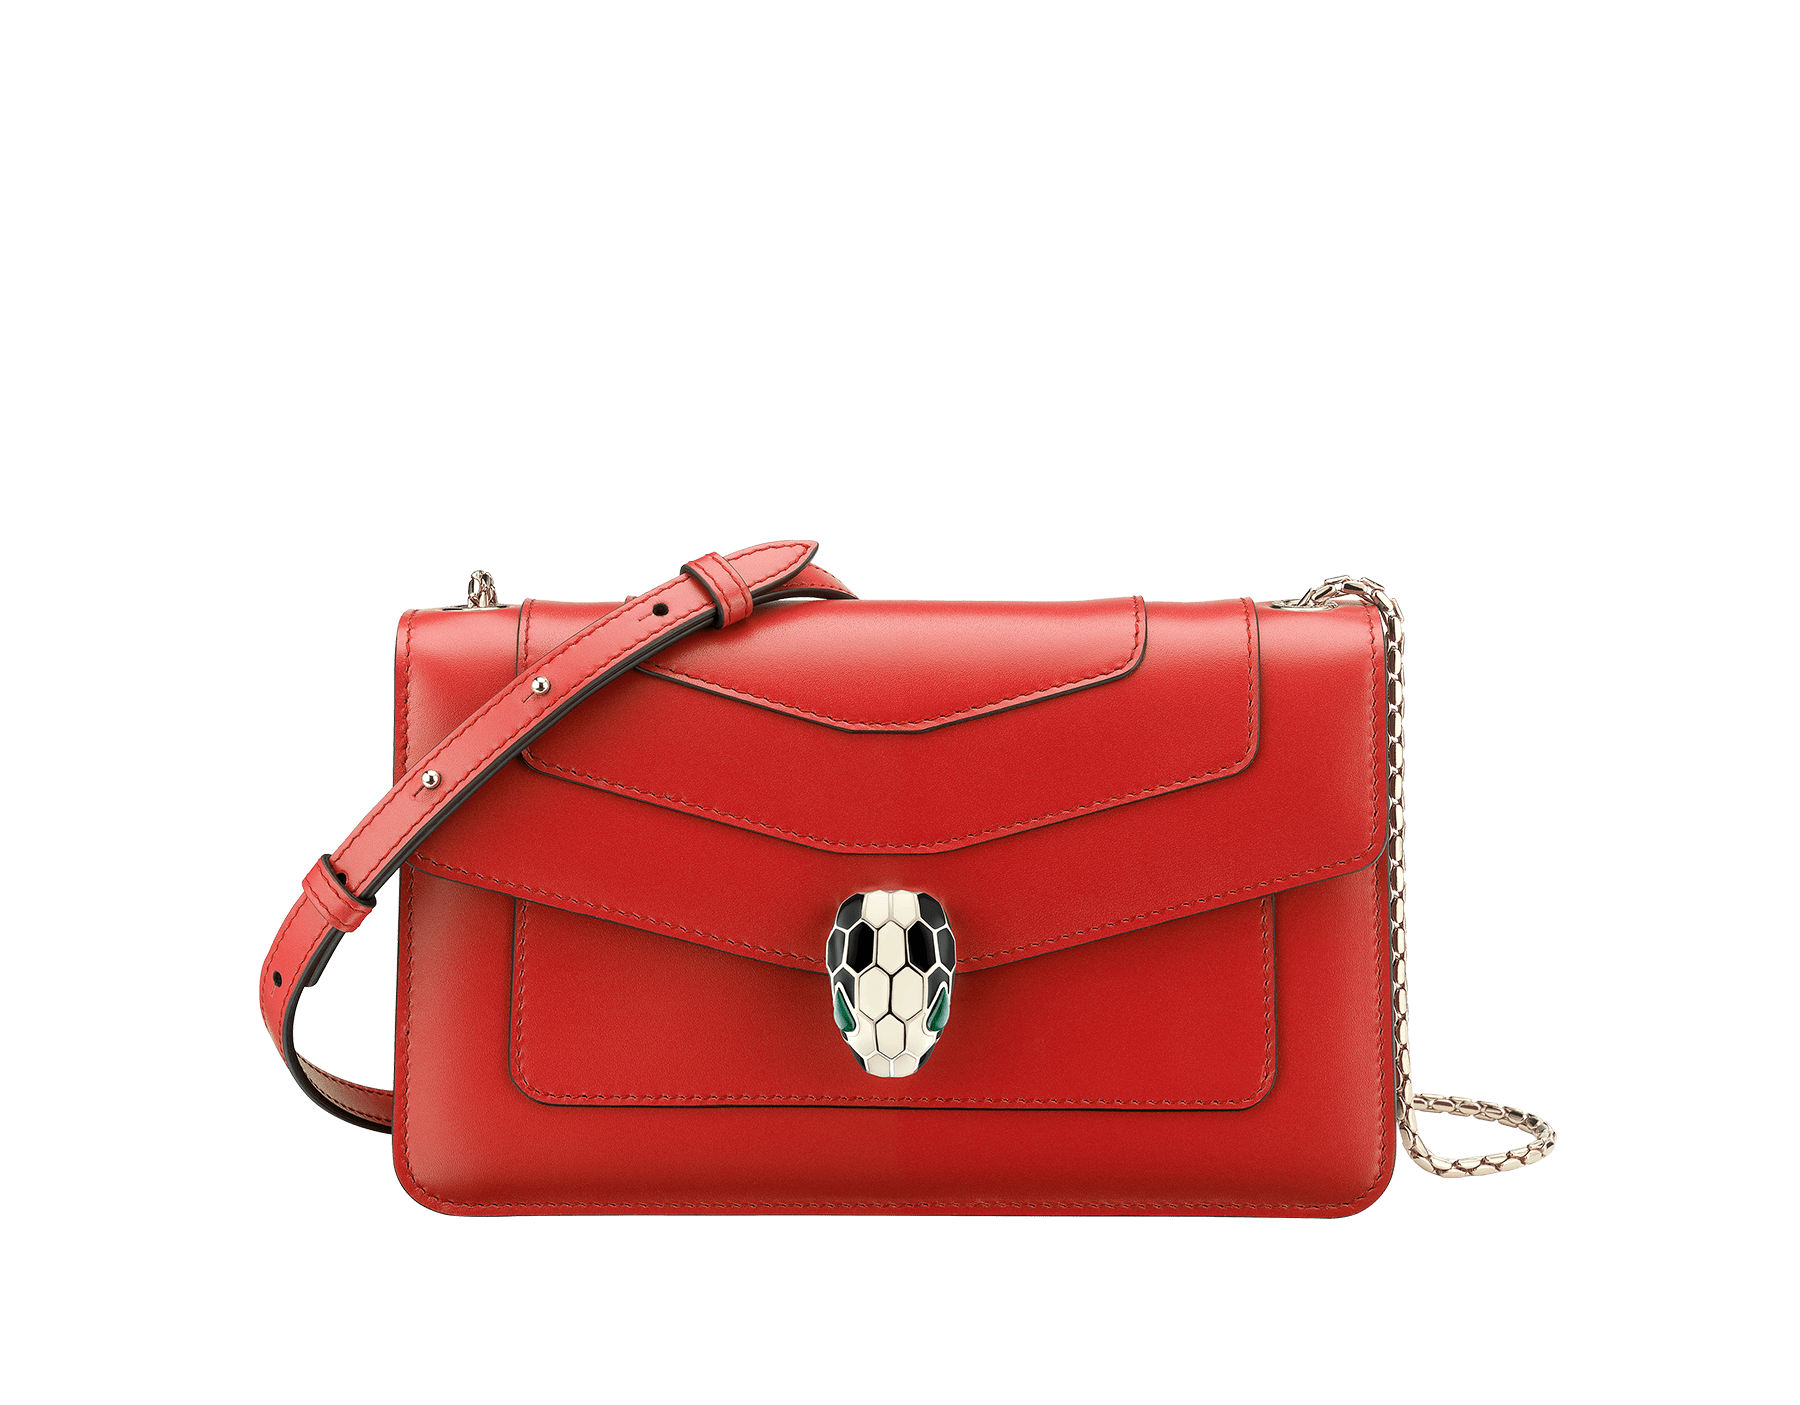 “Serpenti Forever ” crossbody bag in carmine jasper calf leather. Iconic snakehead closure in light gold plated brass enriched with black and white enamel and green malachite eyes 287020 image 1